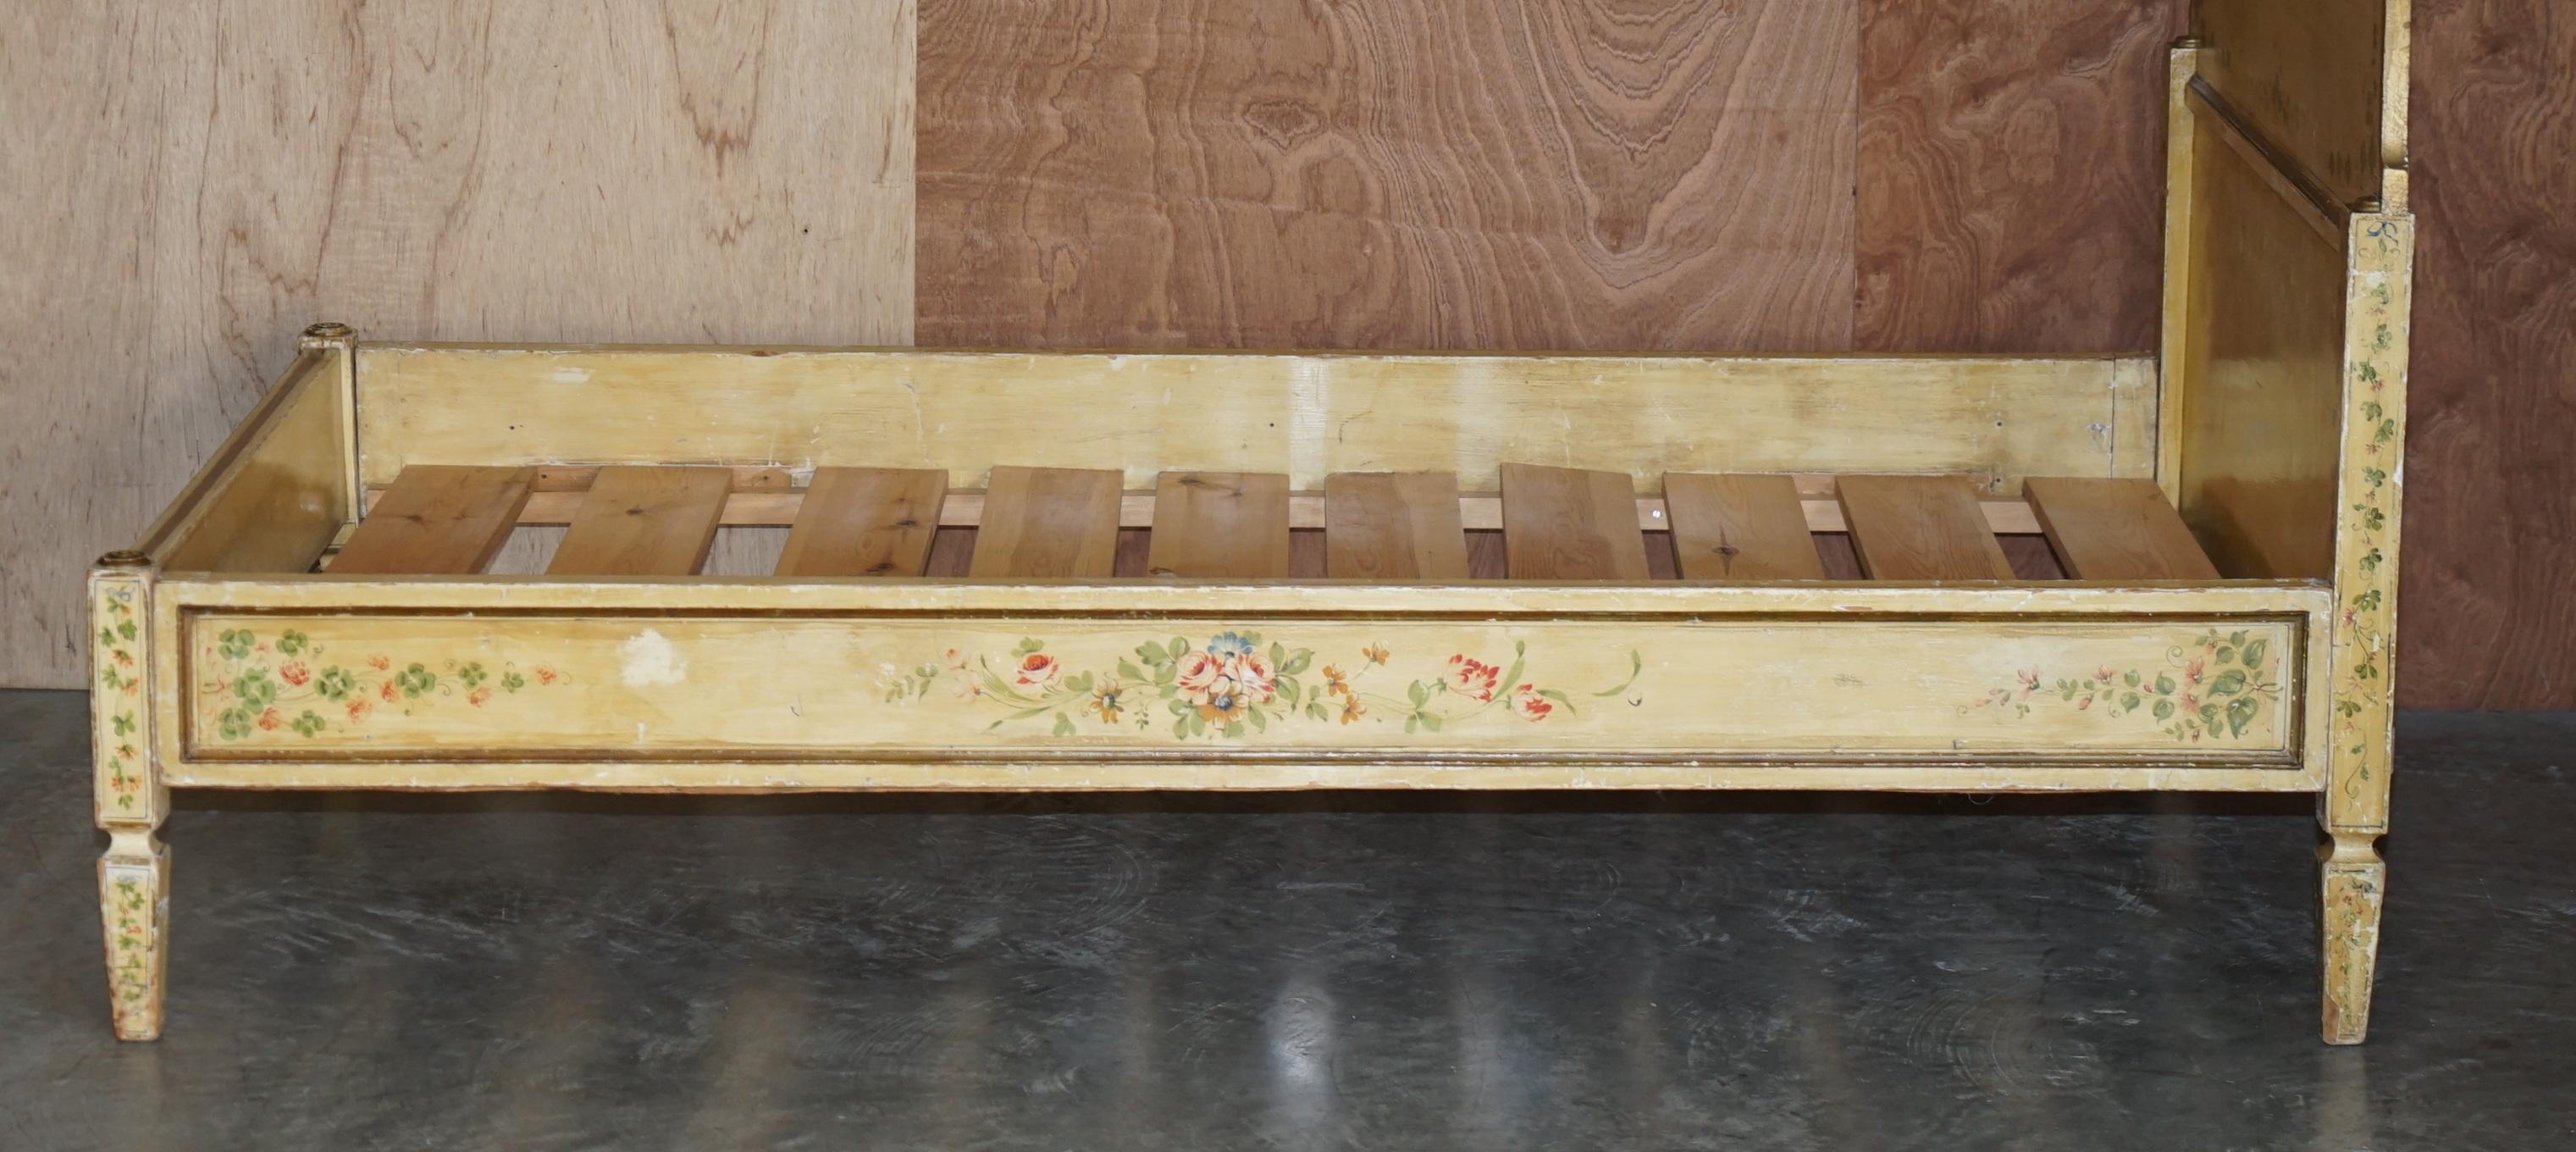 Antique French Hand Painted Ornately Decorated Bed Frame in Oak Pine Slats For Sale 10